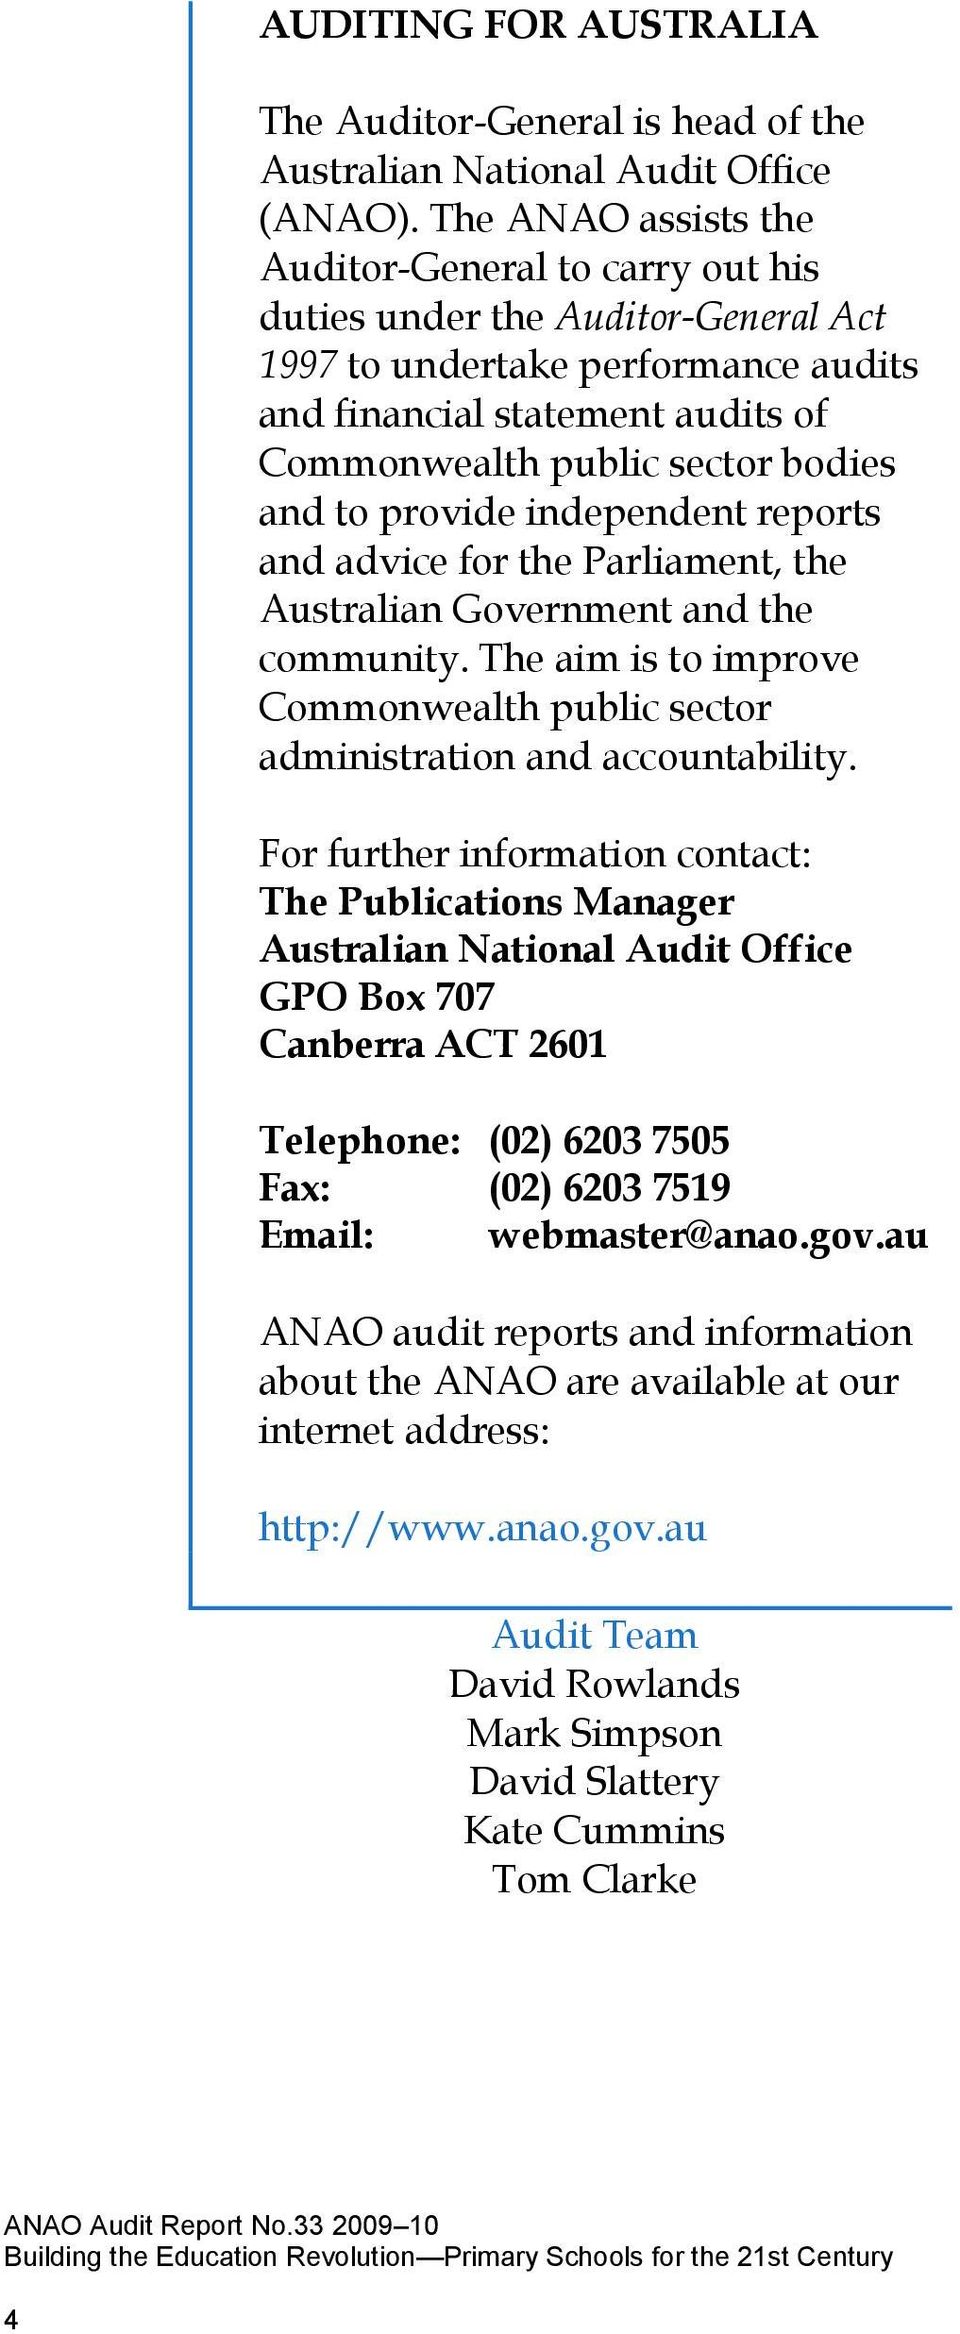 to provide independent reports and advice for the Parliament, the Australian Government and the community. The aim is to improve Commonwealth public sector administration and accountability.